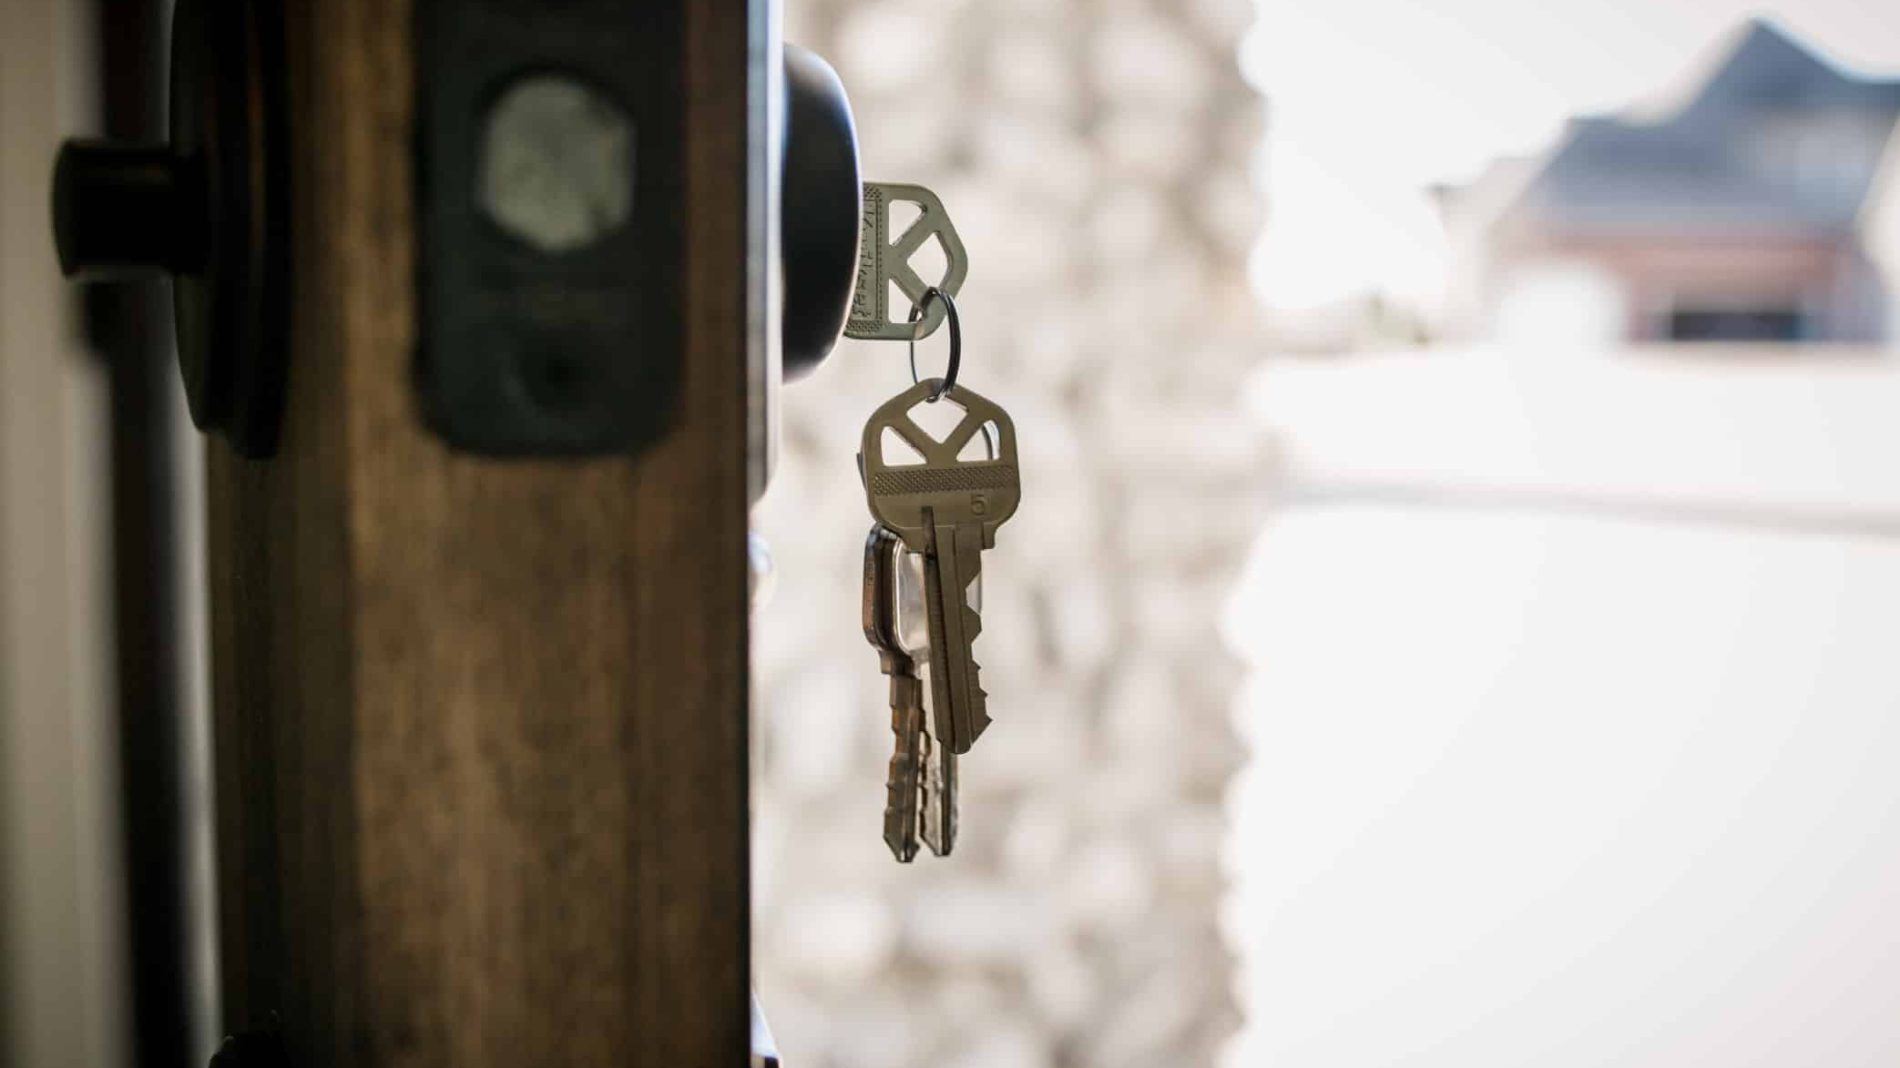 A set of keys hanging from a door - eviction